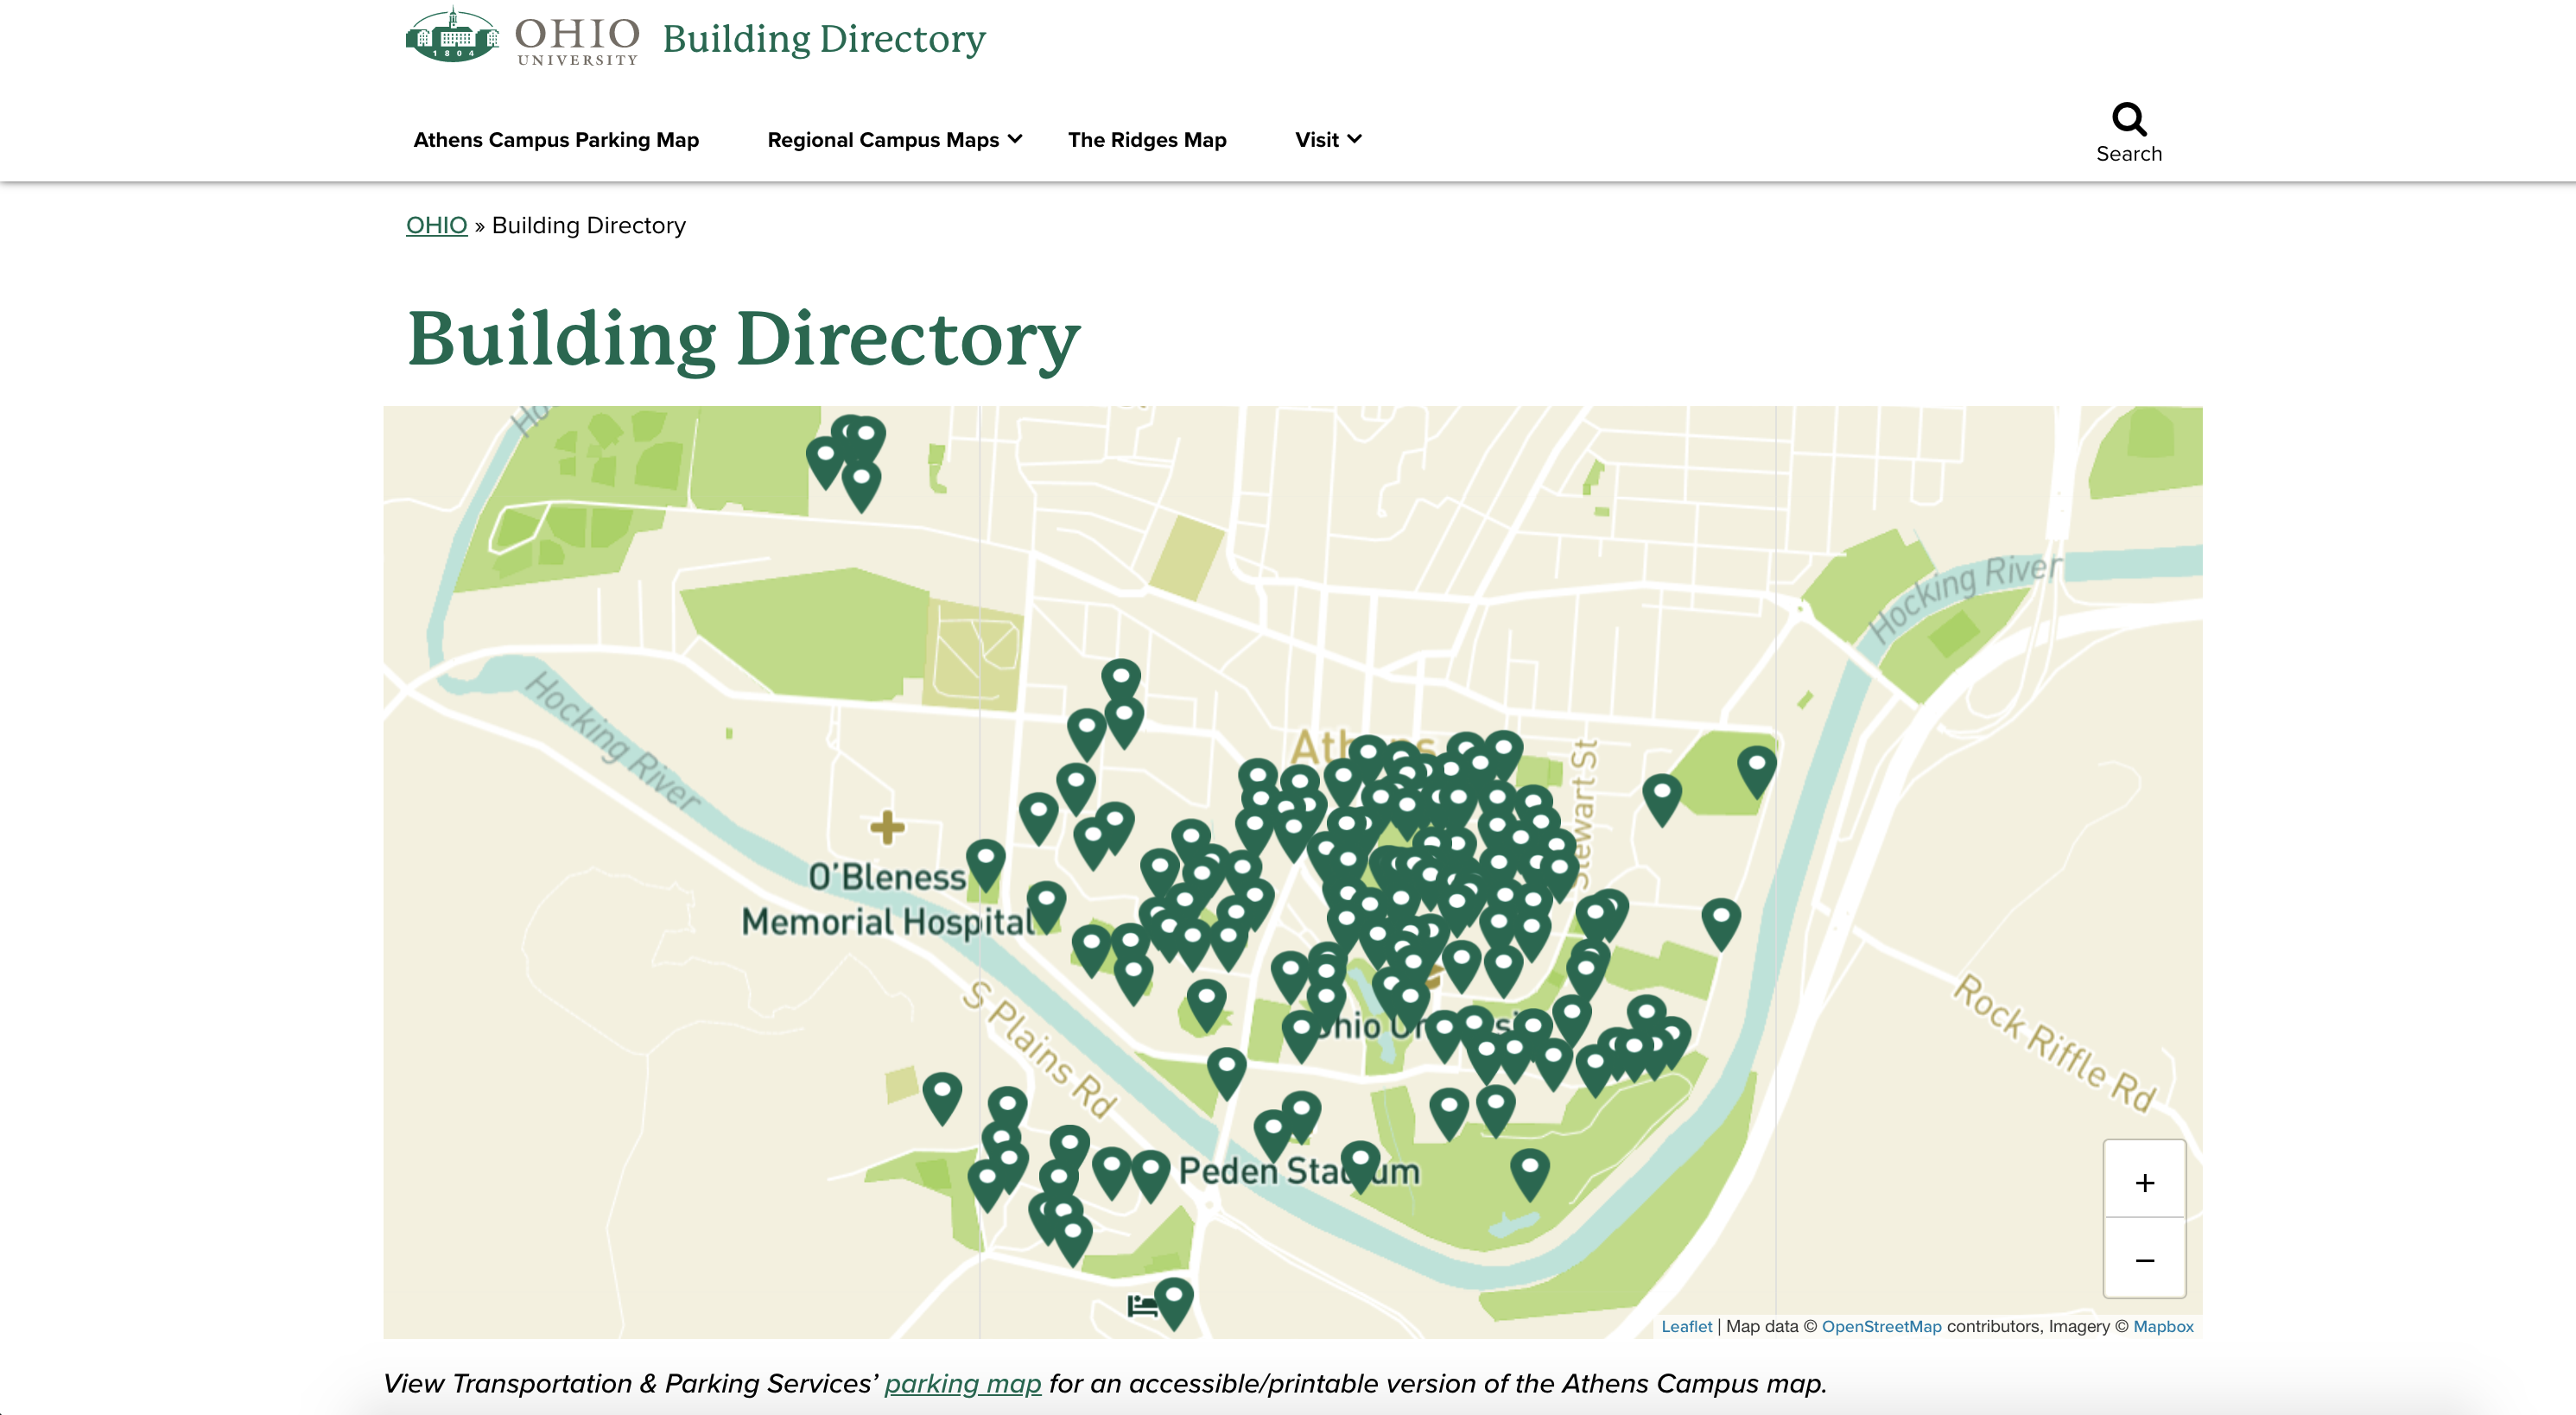 New Building Directory website on ohio.edu, including a main interactive map that shows each building as a pinpoint